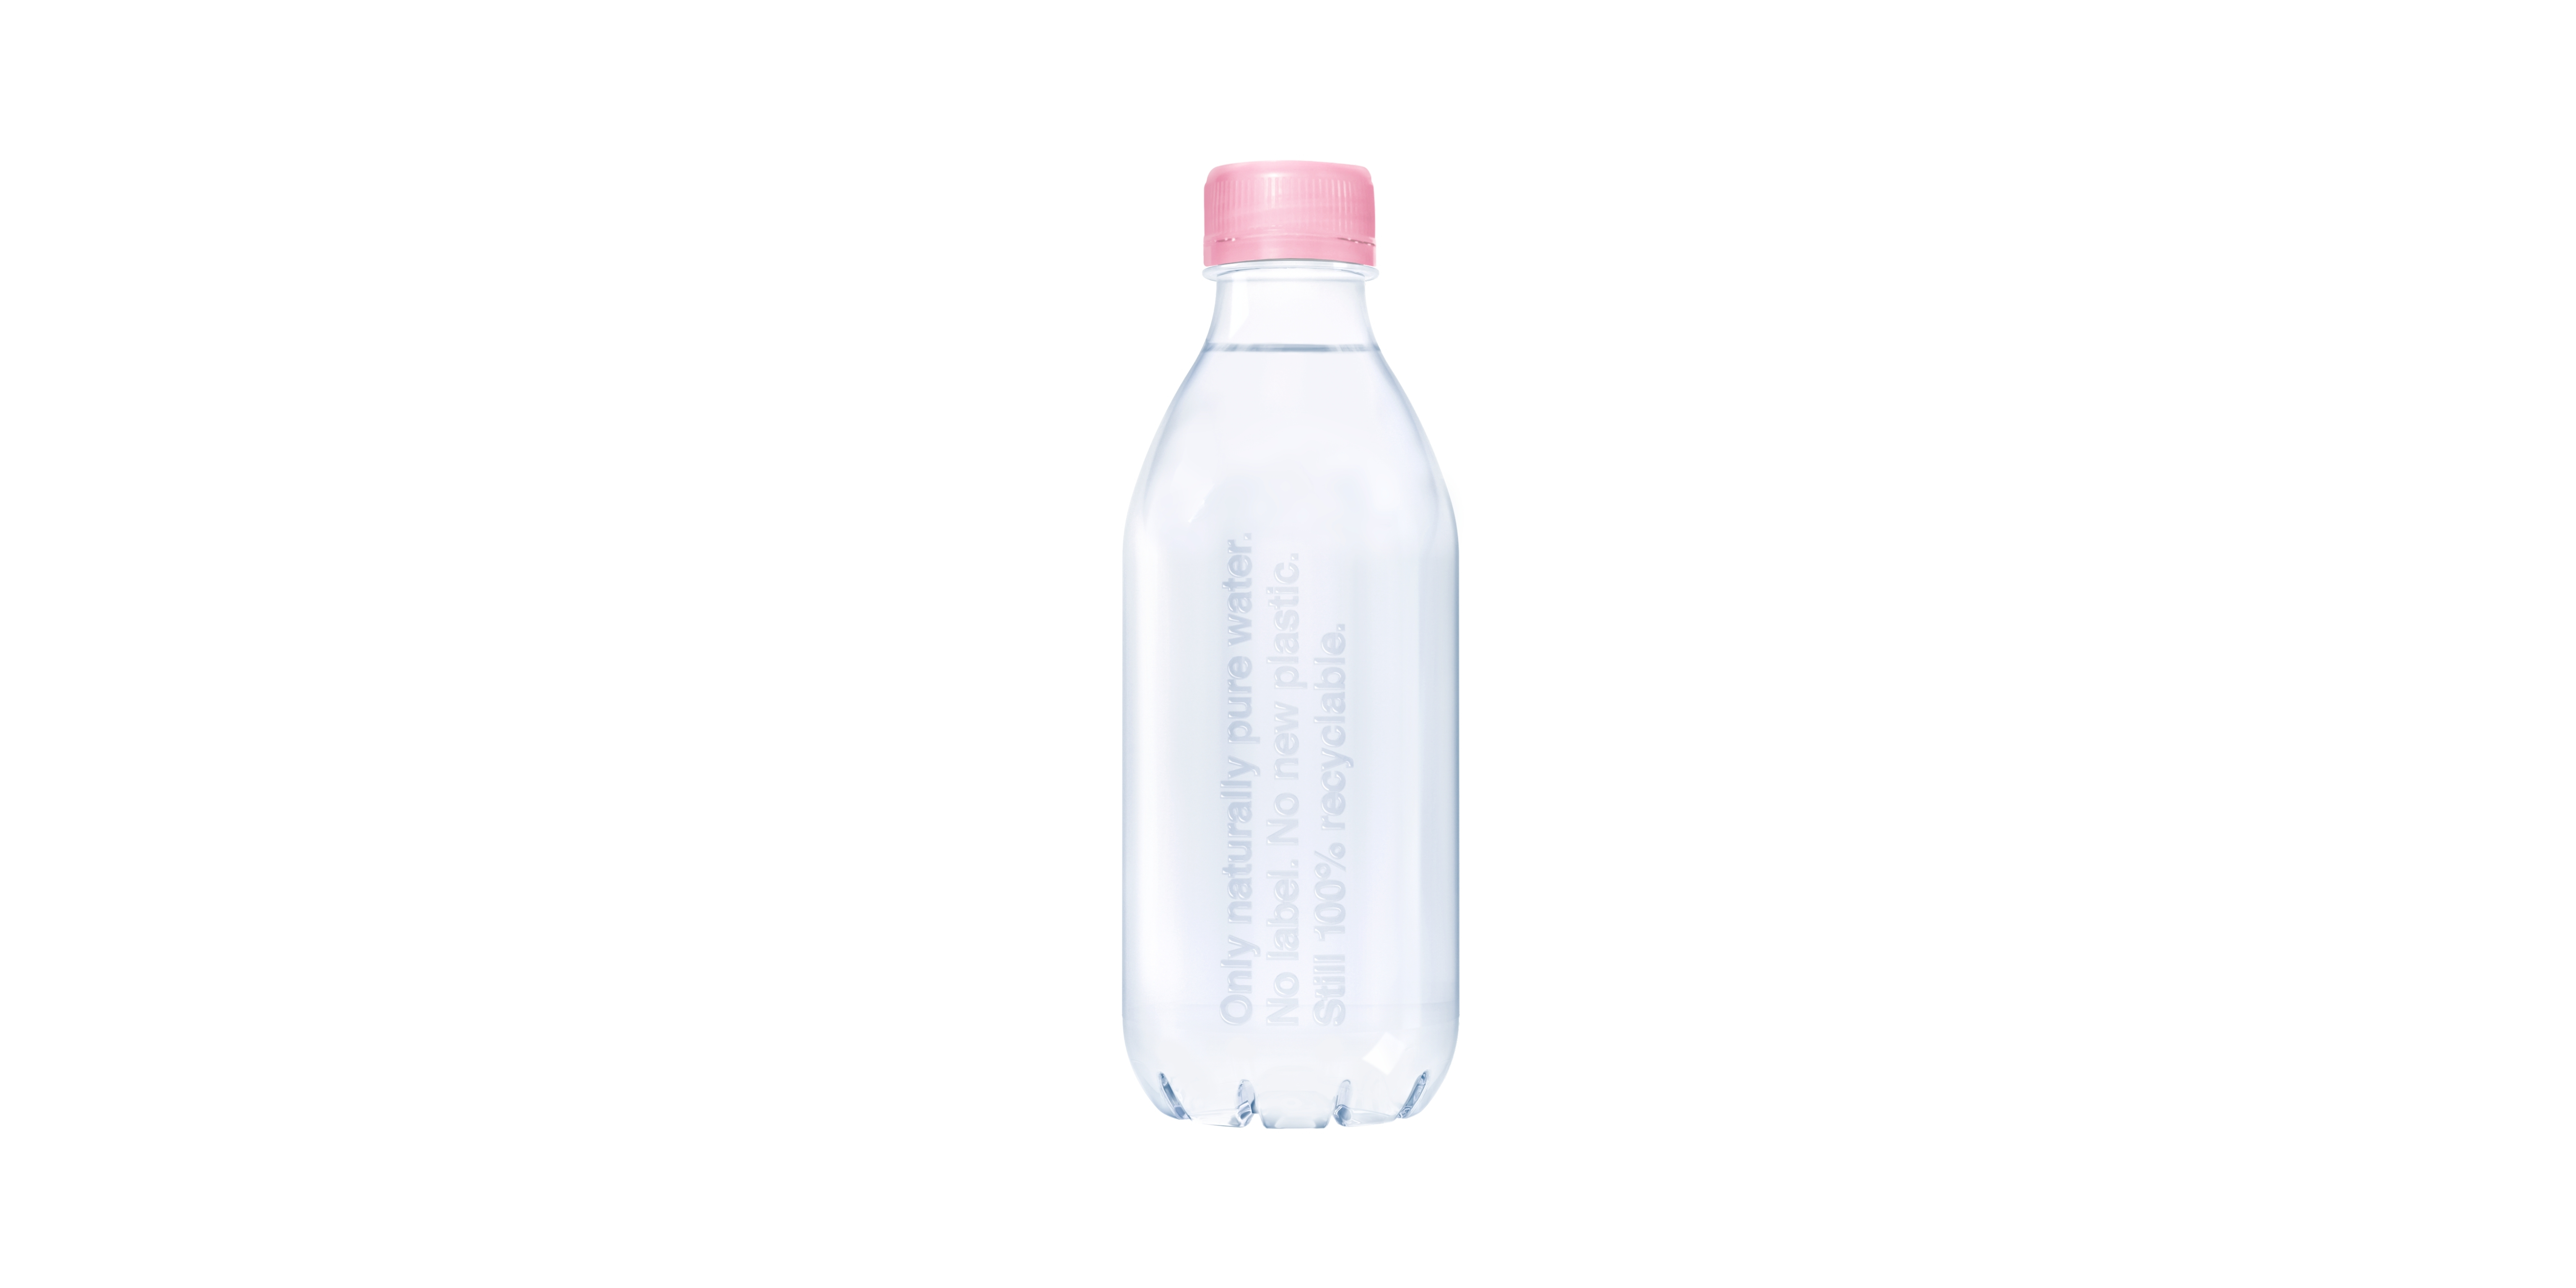 https://www.danone.com/content/dam/corp/global/danonecom/brands/waters/evian/carrousel/first-bottle-%20without-label-,%20100-recycled-material%20(rPET).jpg